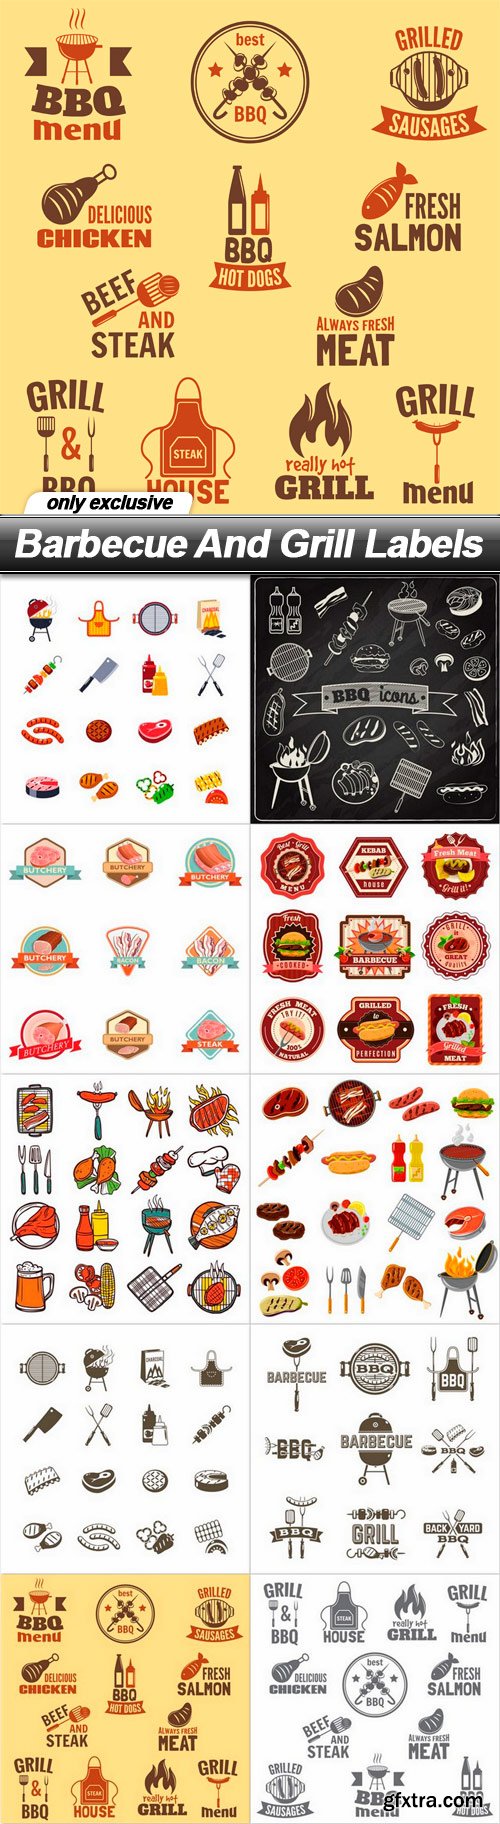 Barbecue And Grill Labels - 10 EPS